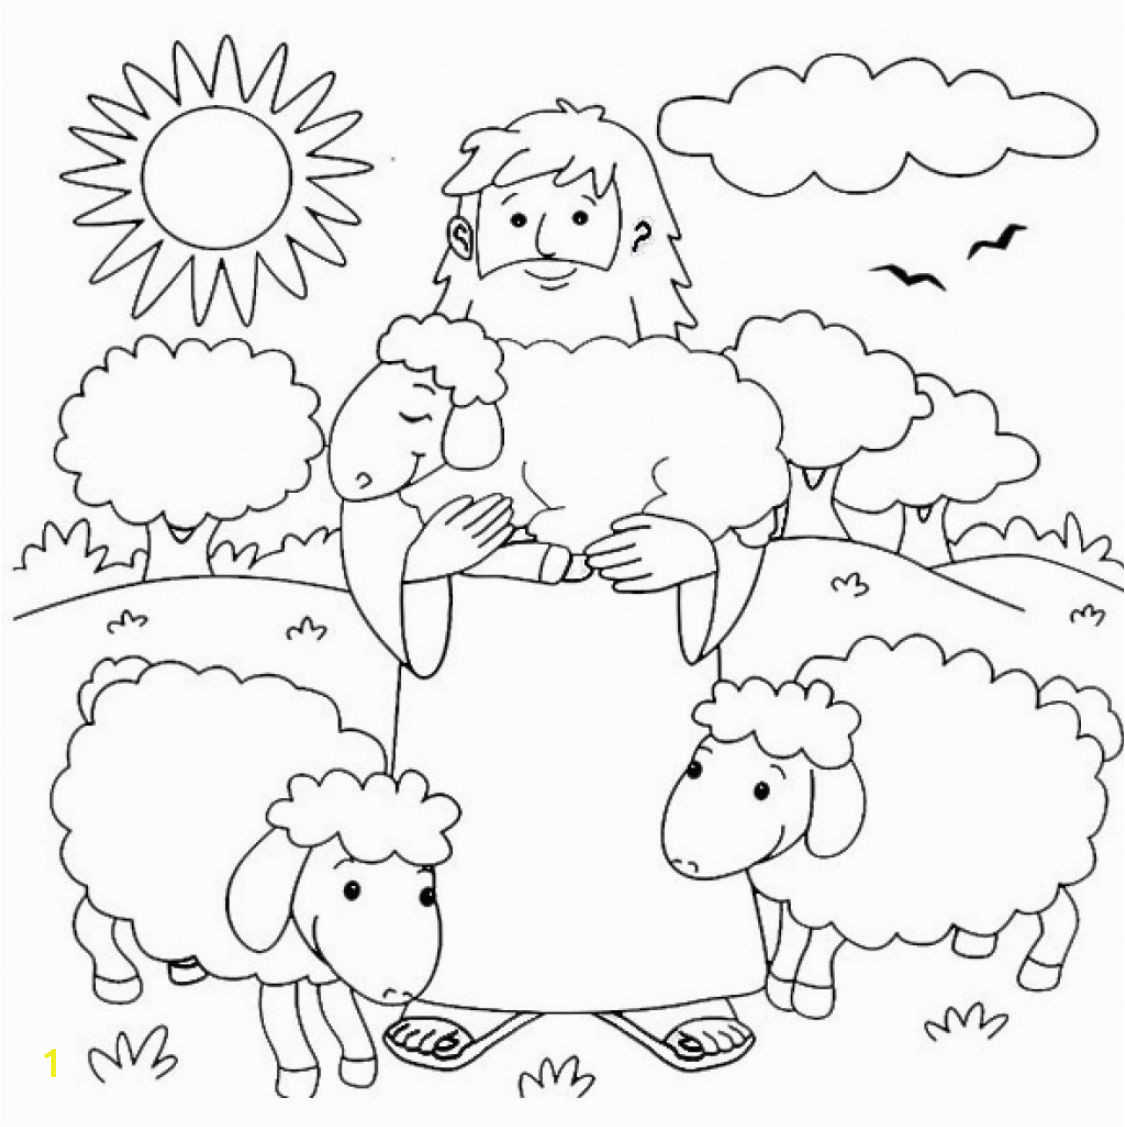 Modest Sheep And Shepherd Coloring Page Best And Awesome Ideas